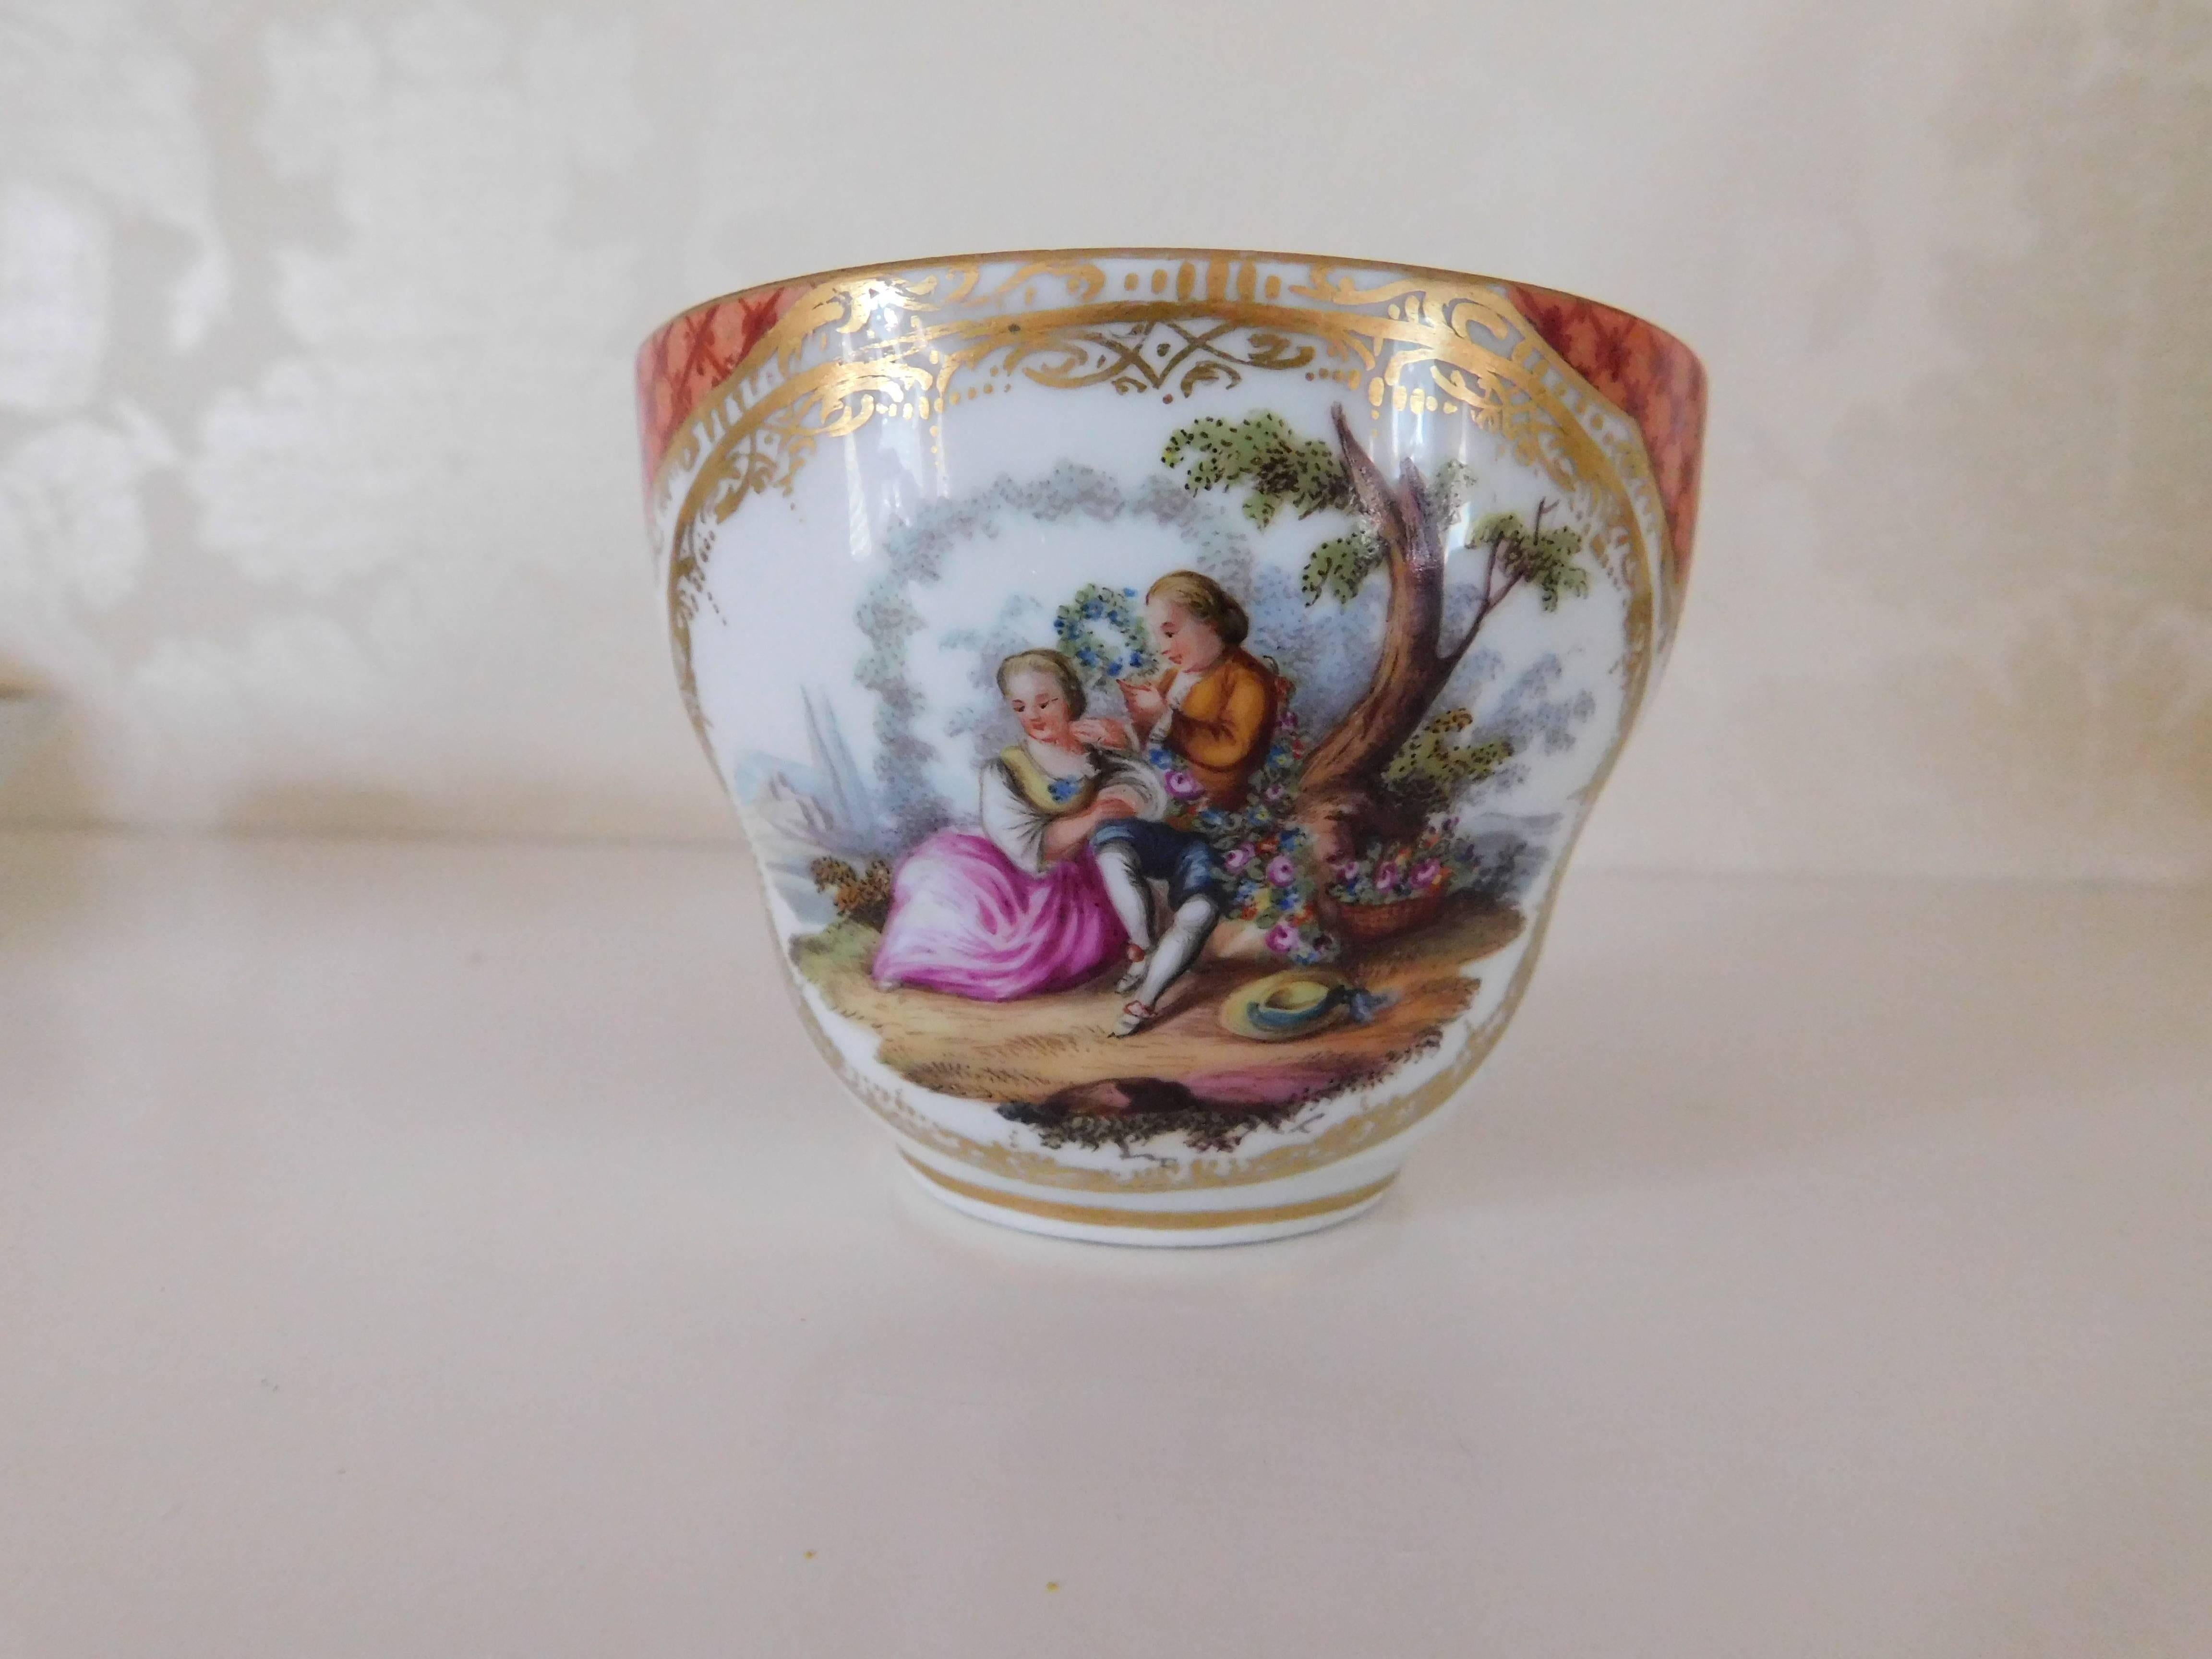 19th century, Meissen Porcelain cup and saucer with gallant scene 
Measurements in inches:
Cup 3 D x 2.5 H
Saucer 5.75 D x 1.5 H.